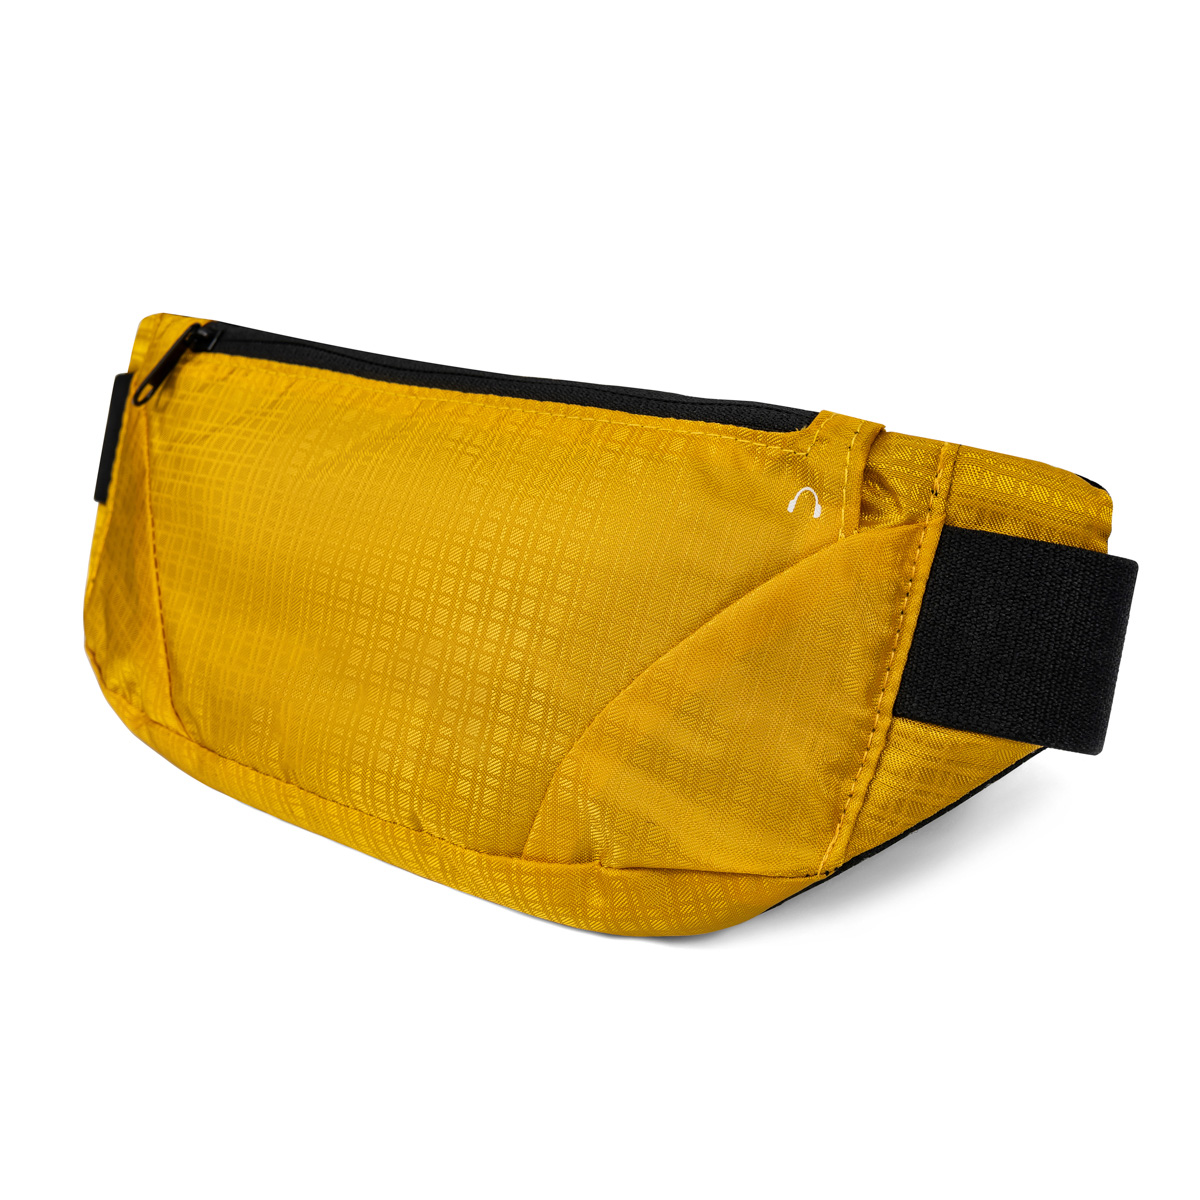 Running Hiking Cycling Fanny Pack Product Details